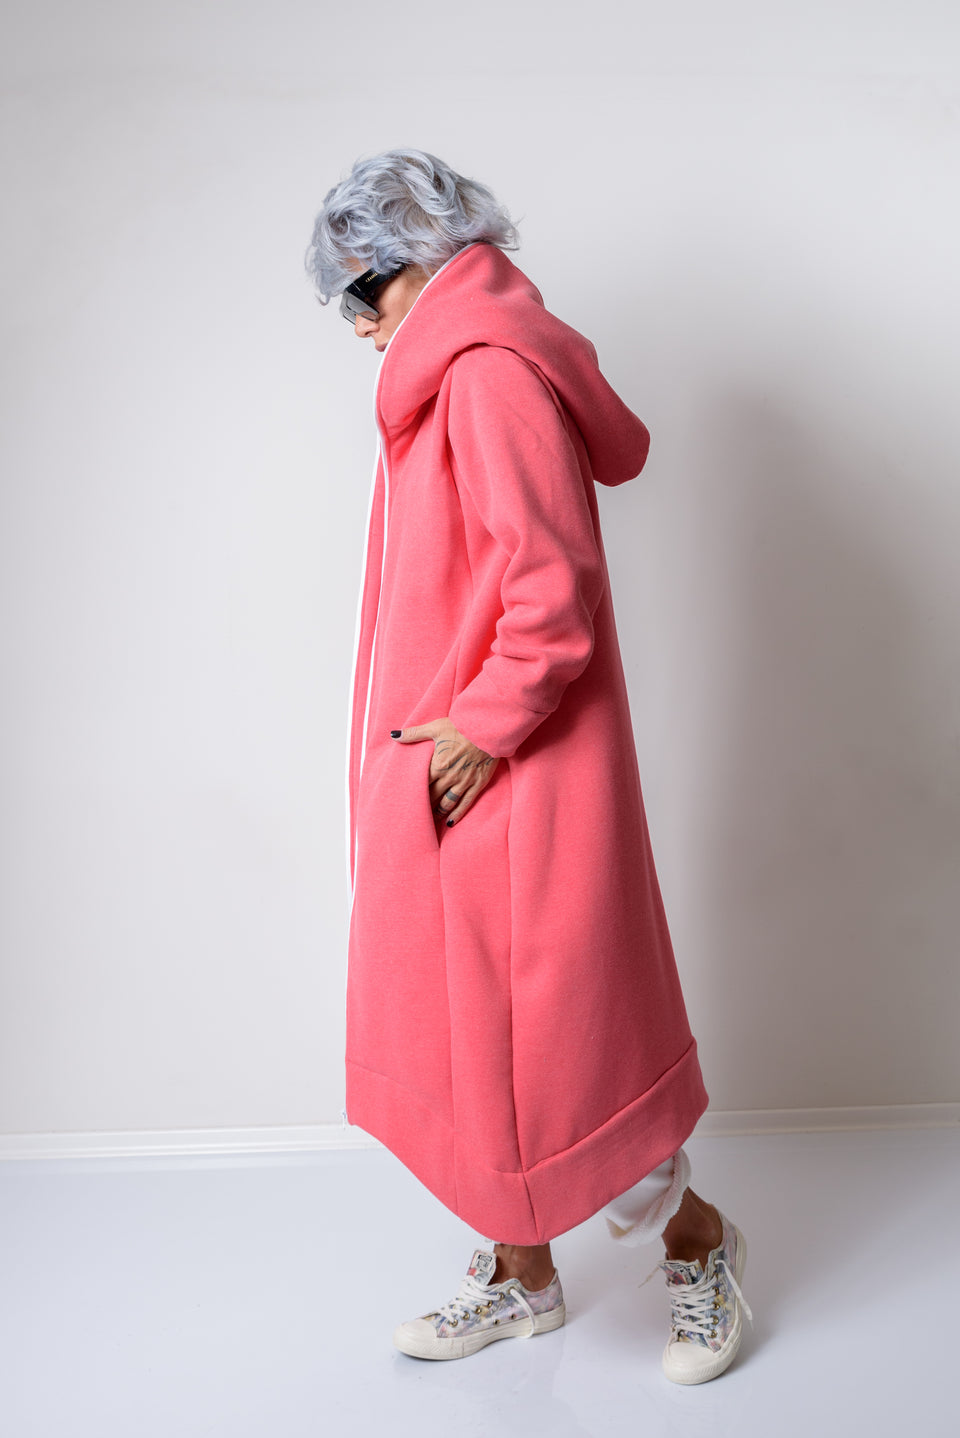 Pink Warm Quilted Oversized Casual Hoodie Sweatshirt - Clothes By Locker Room